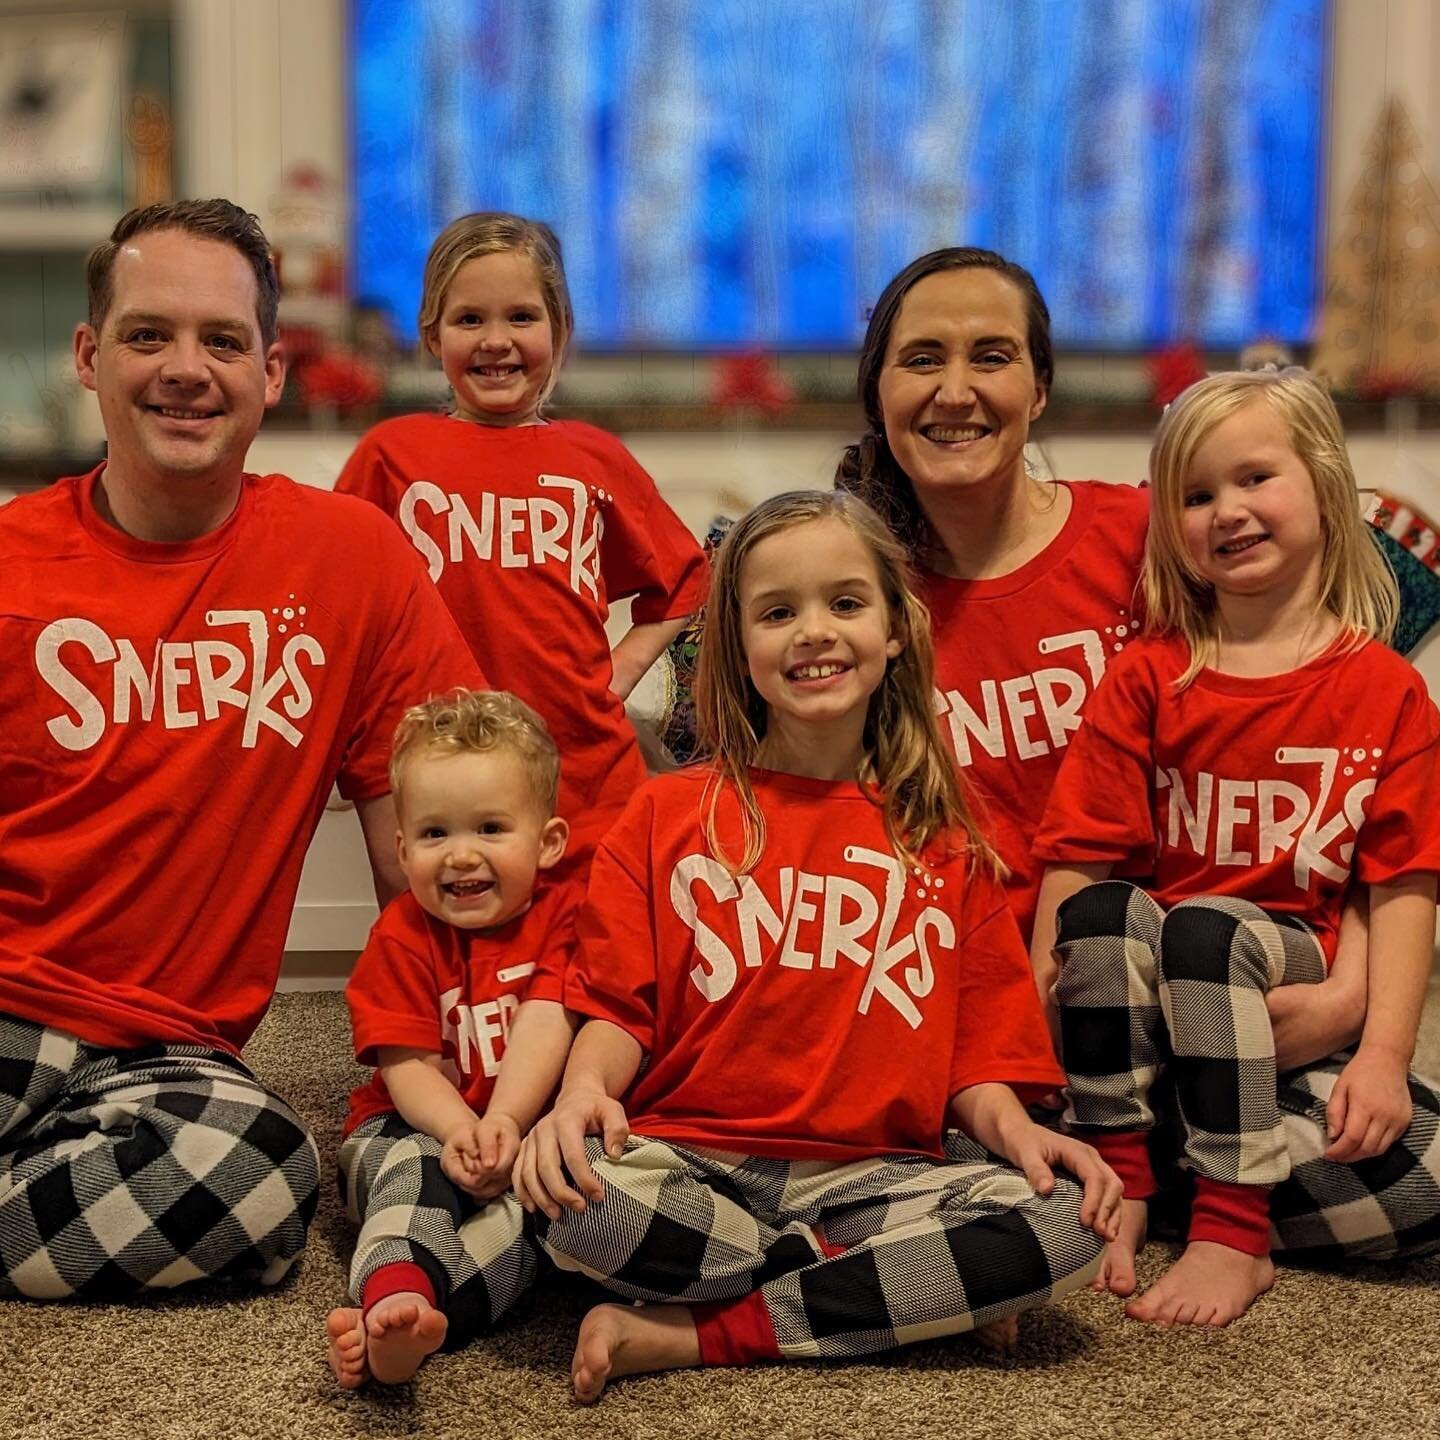 Shout out to the Wilson family!!! Such a fun idea! We think everyone could use some Snerk&rsquo;s pj&rsquo;s;)